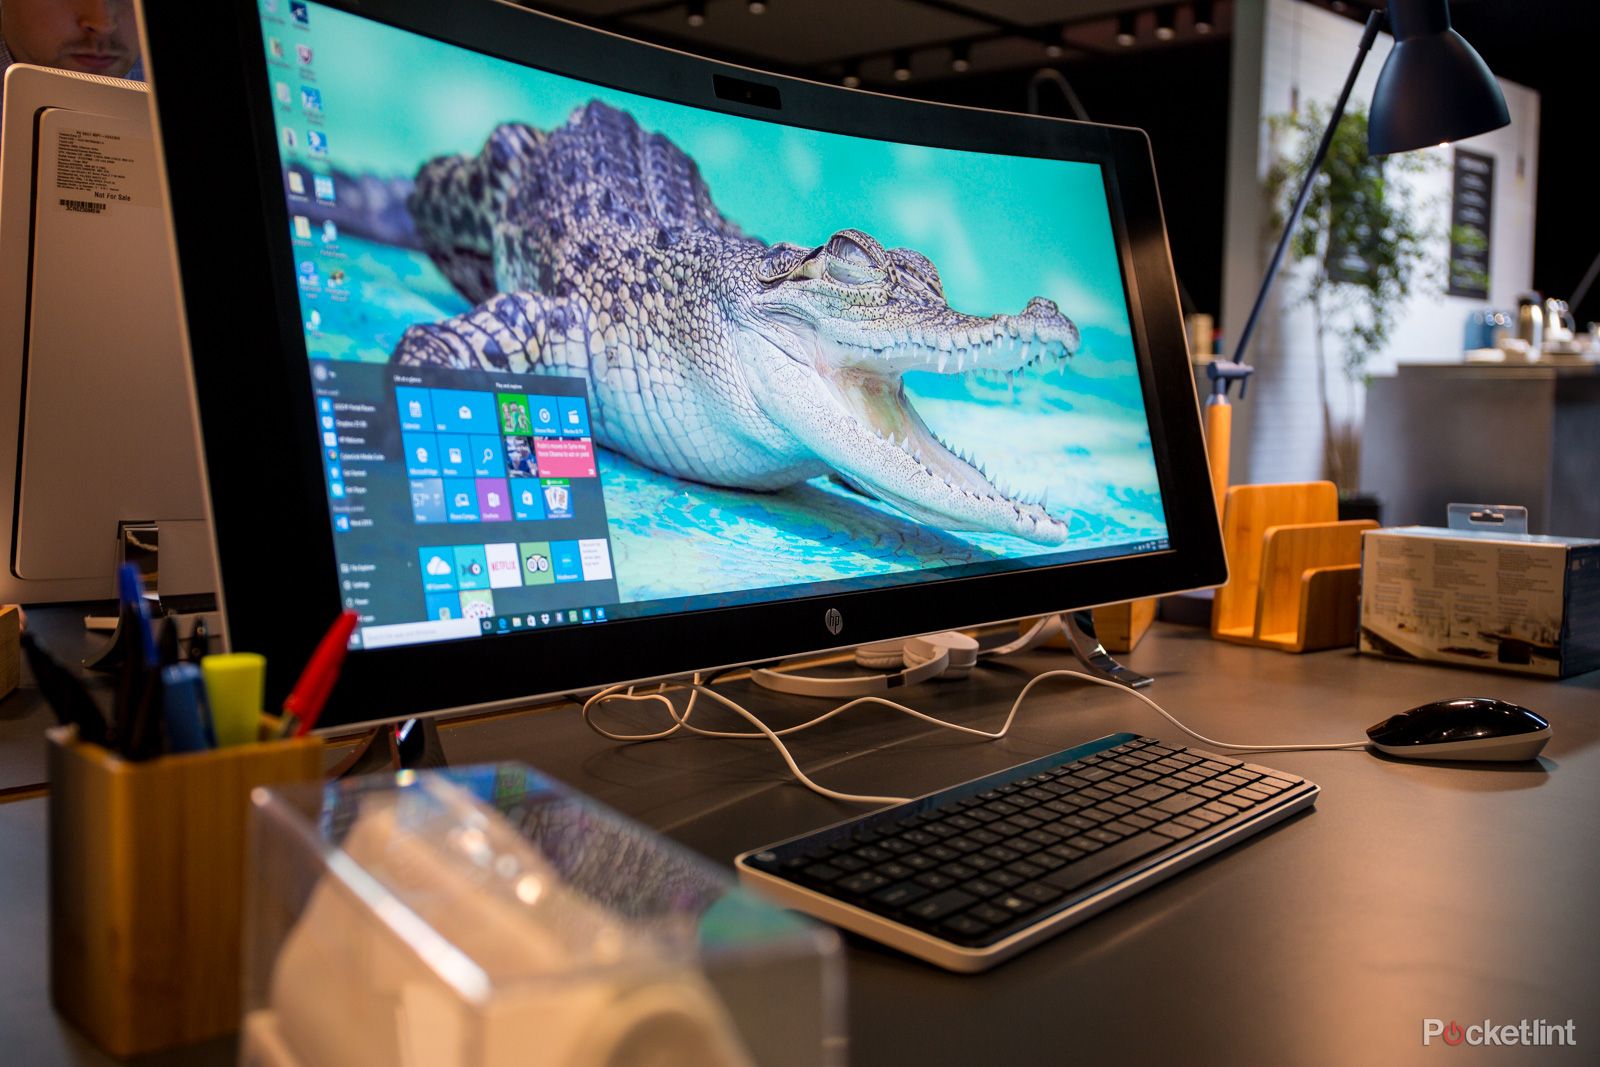 studio verlangen Aas Is the HP Envy Curved All-in-One the sexiest desktop PC in the world?  Spoiler alert: yes!